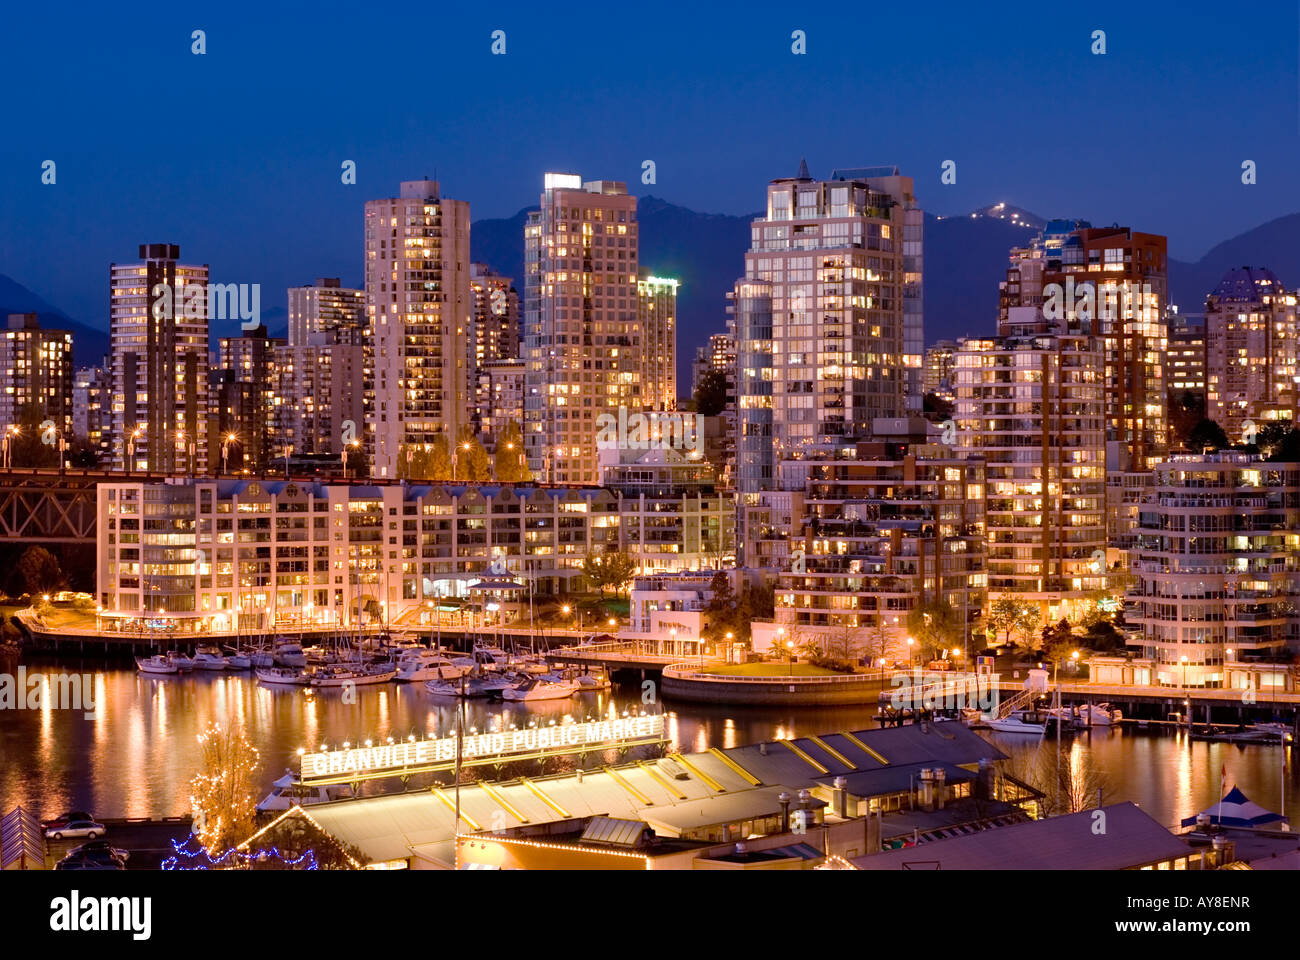 Granville Island Market and False Creek Skyline at night Vancouver Canada Stock Photo